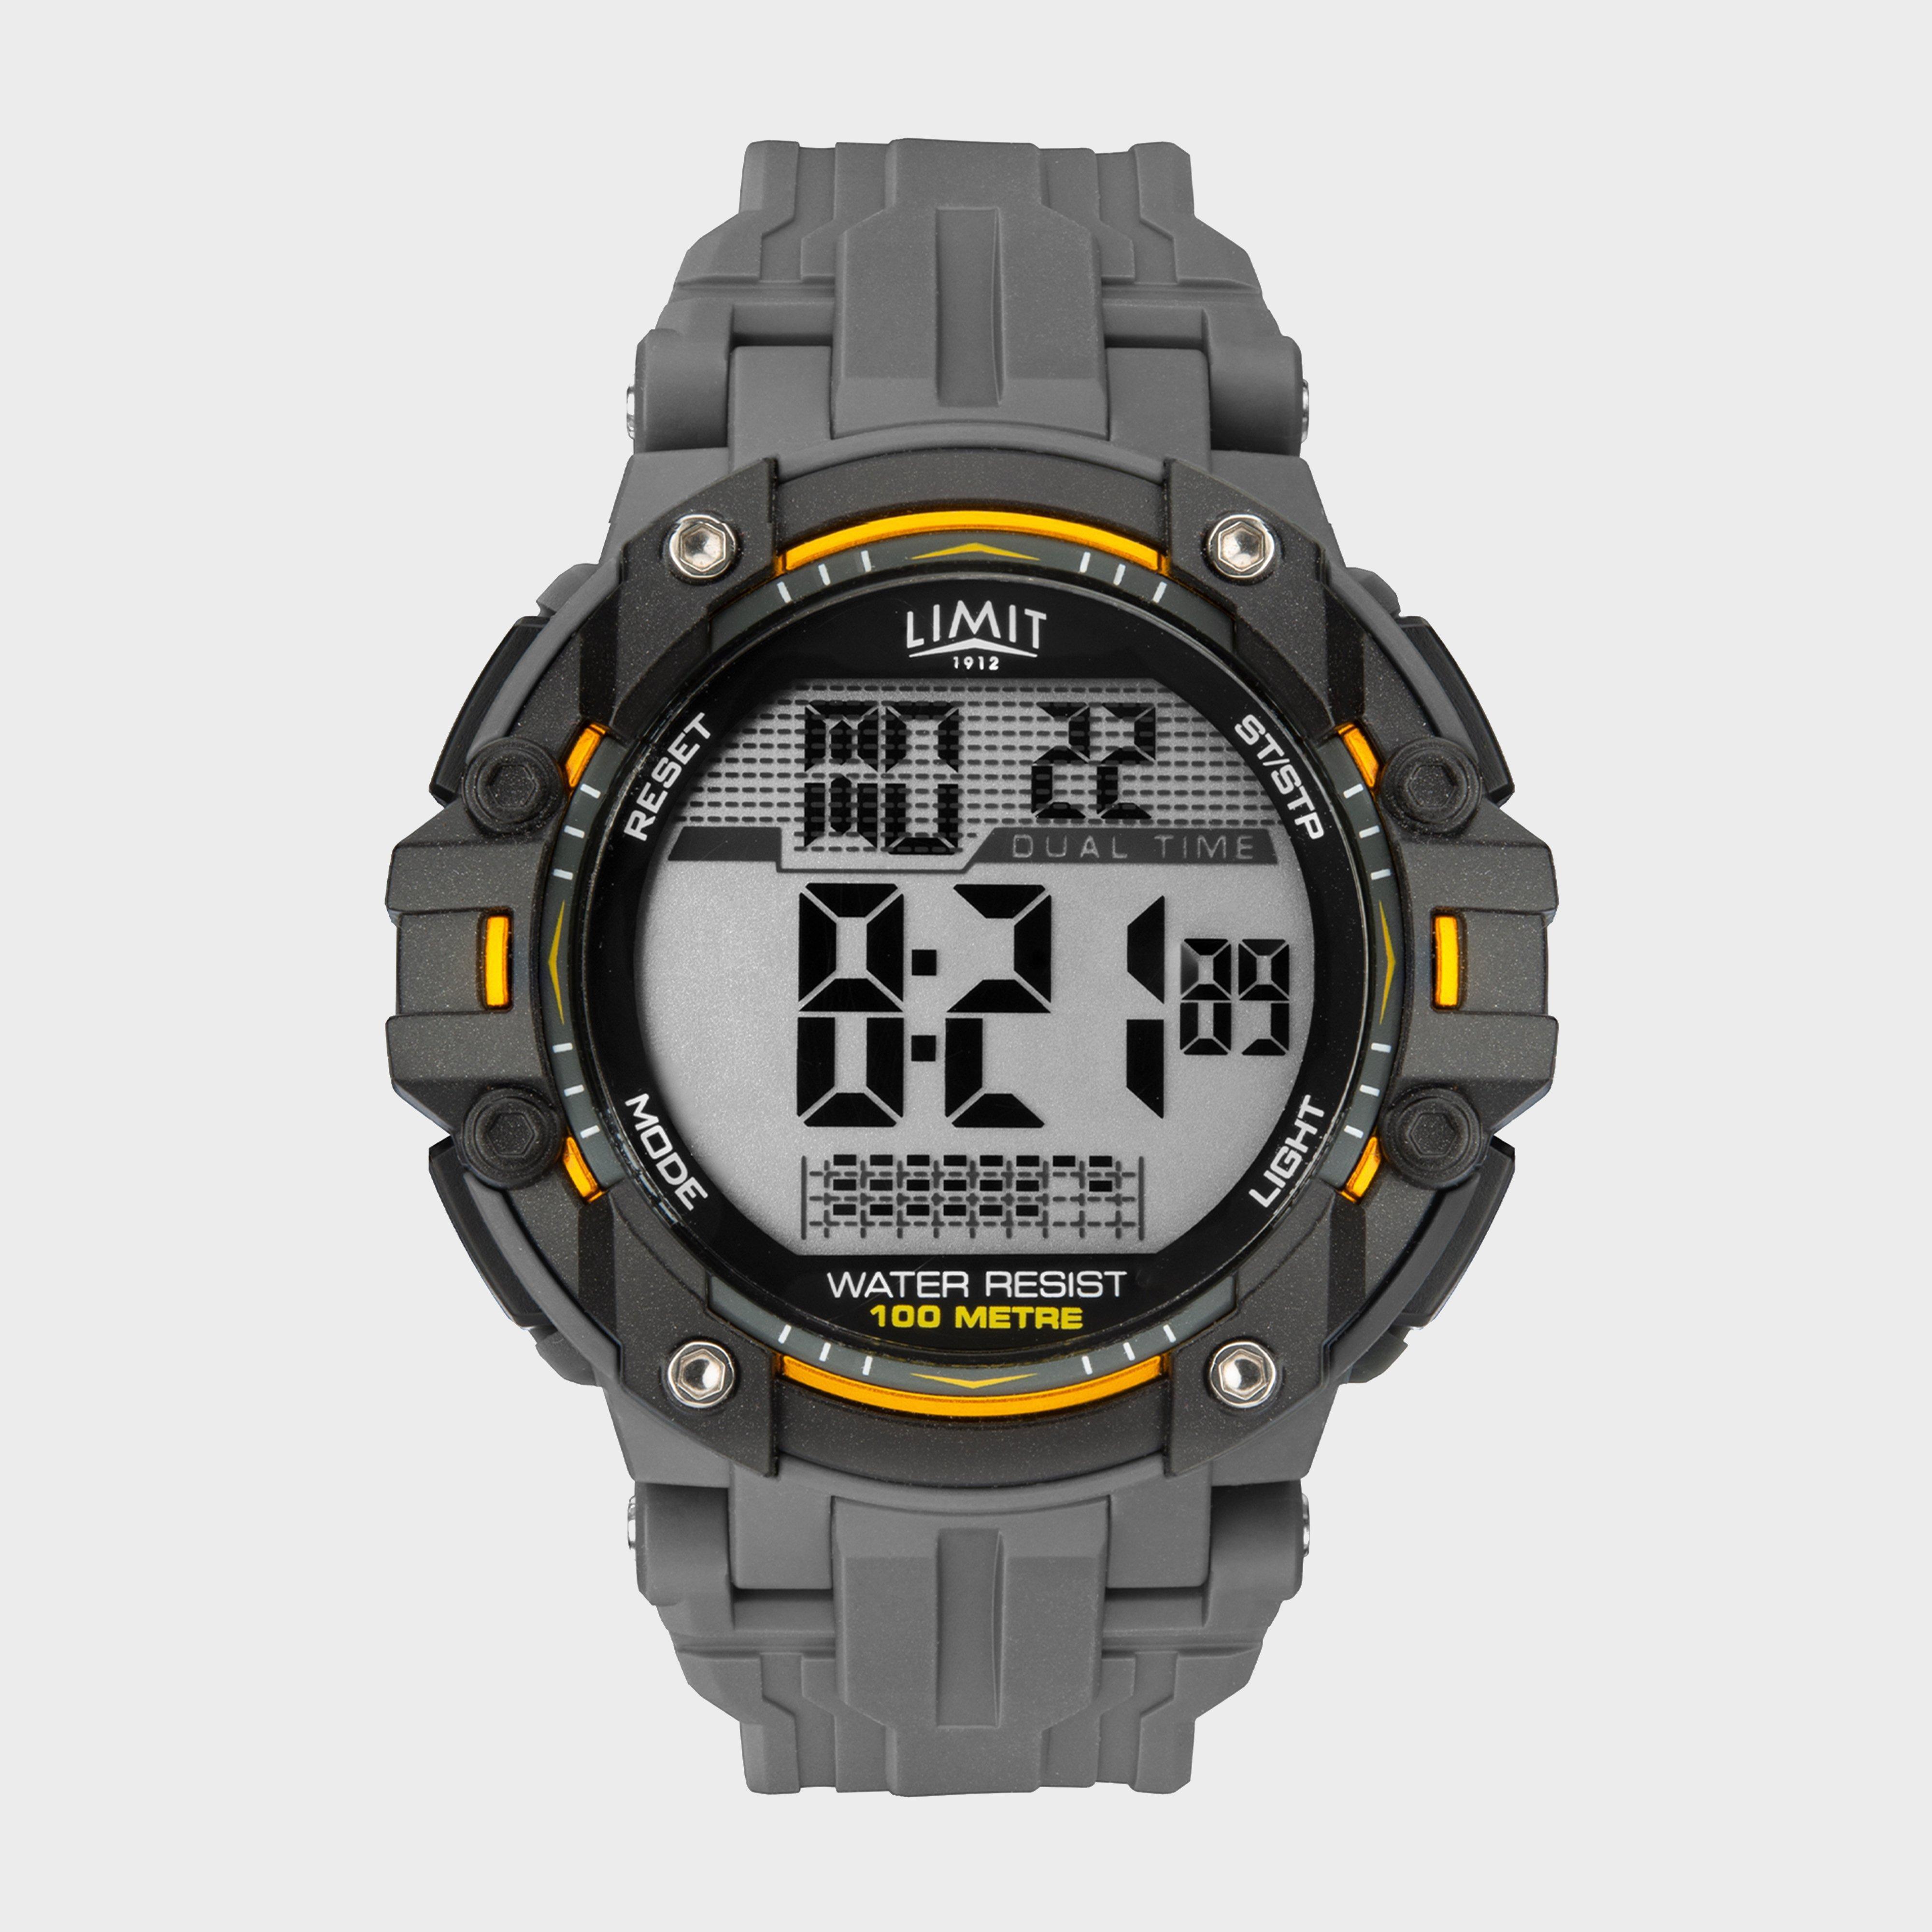 Limit Active Analogue Men's Sports Watch Review